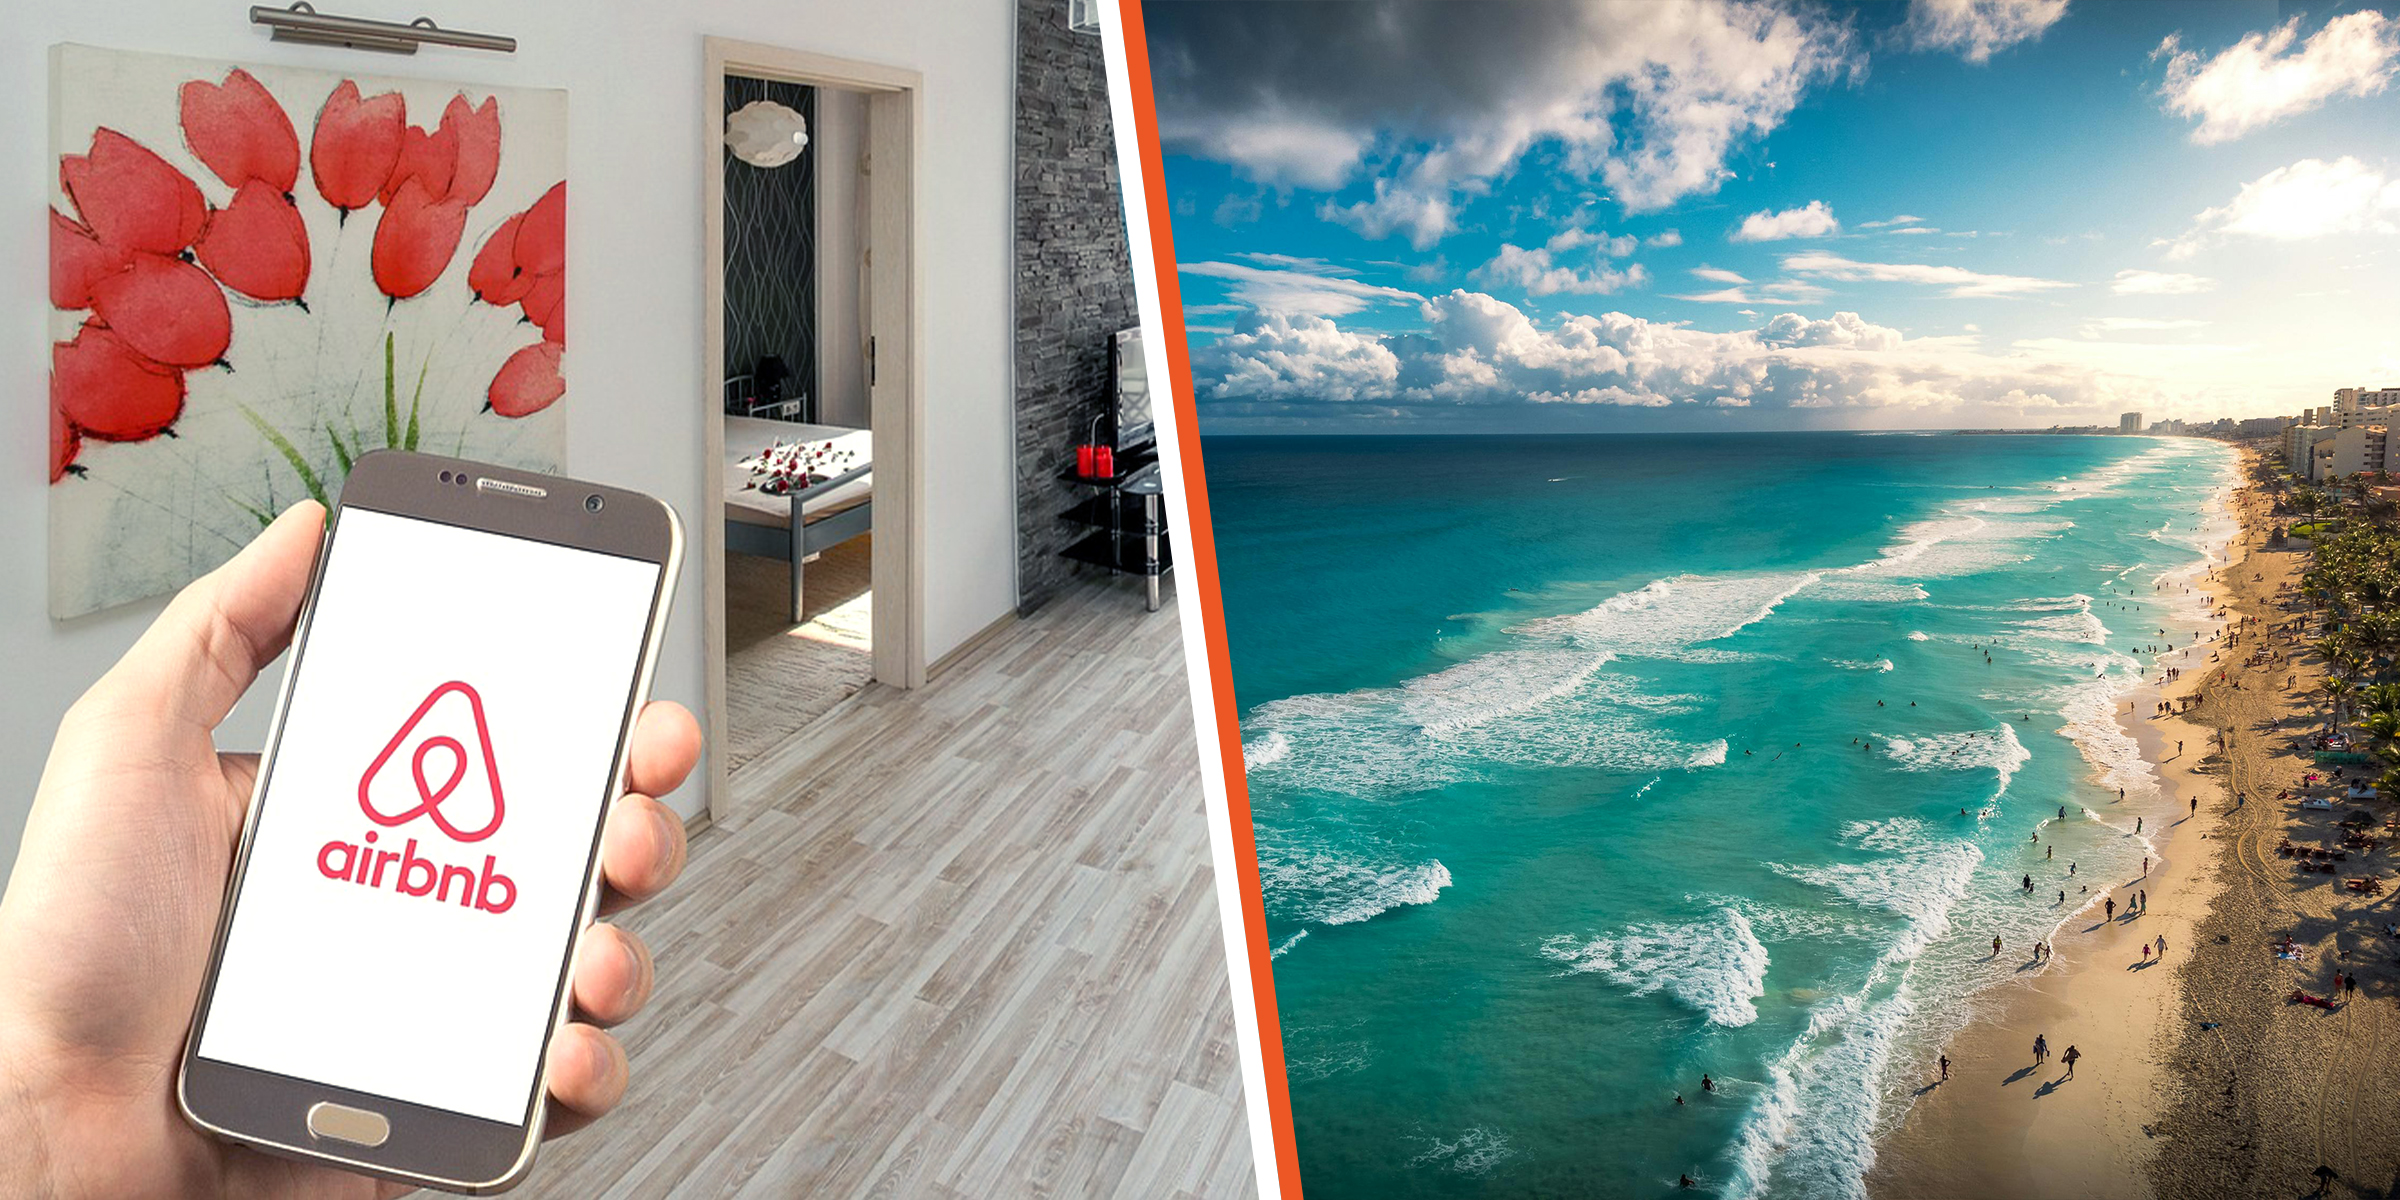 A person using the Airbnb app | Cancún, Mexico | Source: Pexels